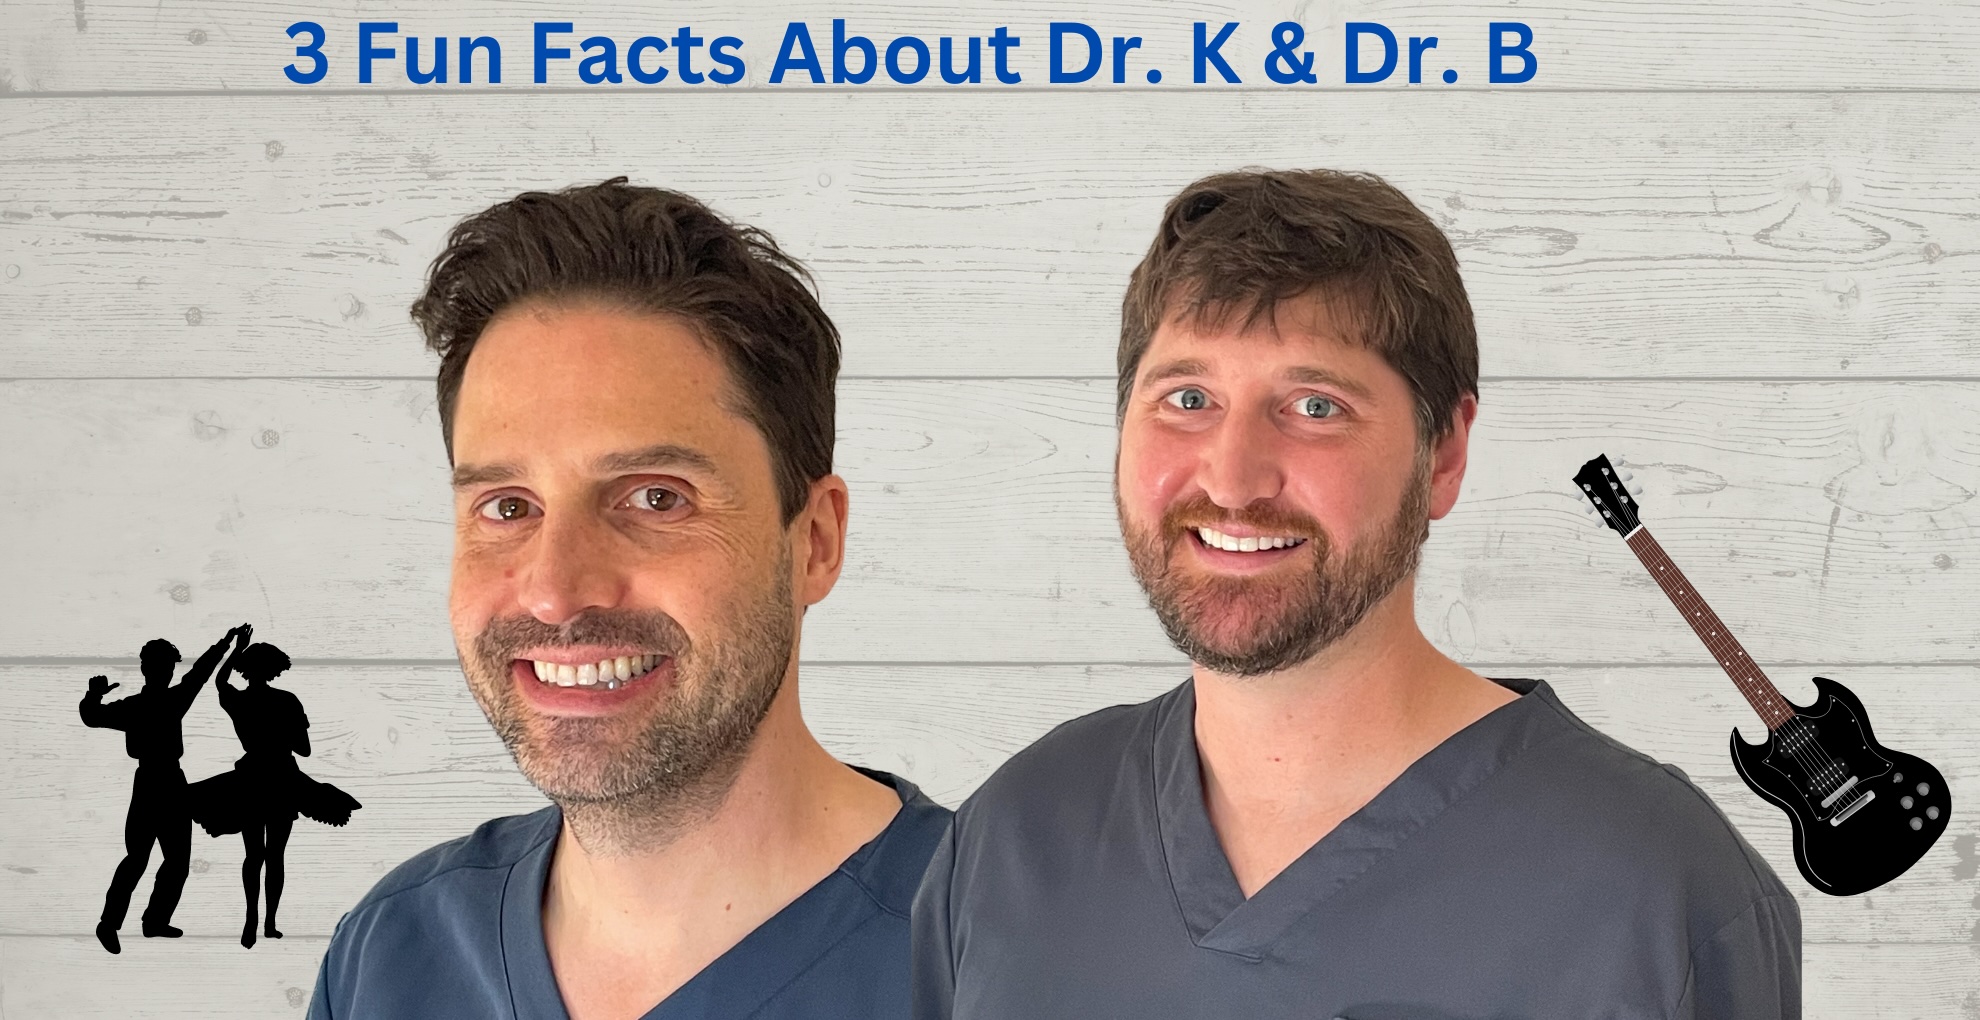 3 Fun Facts About Dr. Brunacini and Dr. Karagiorgos